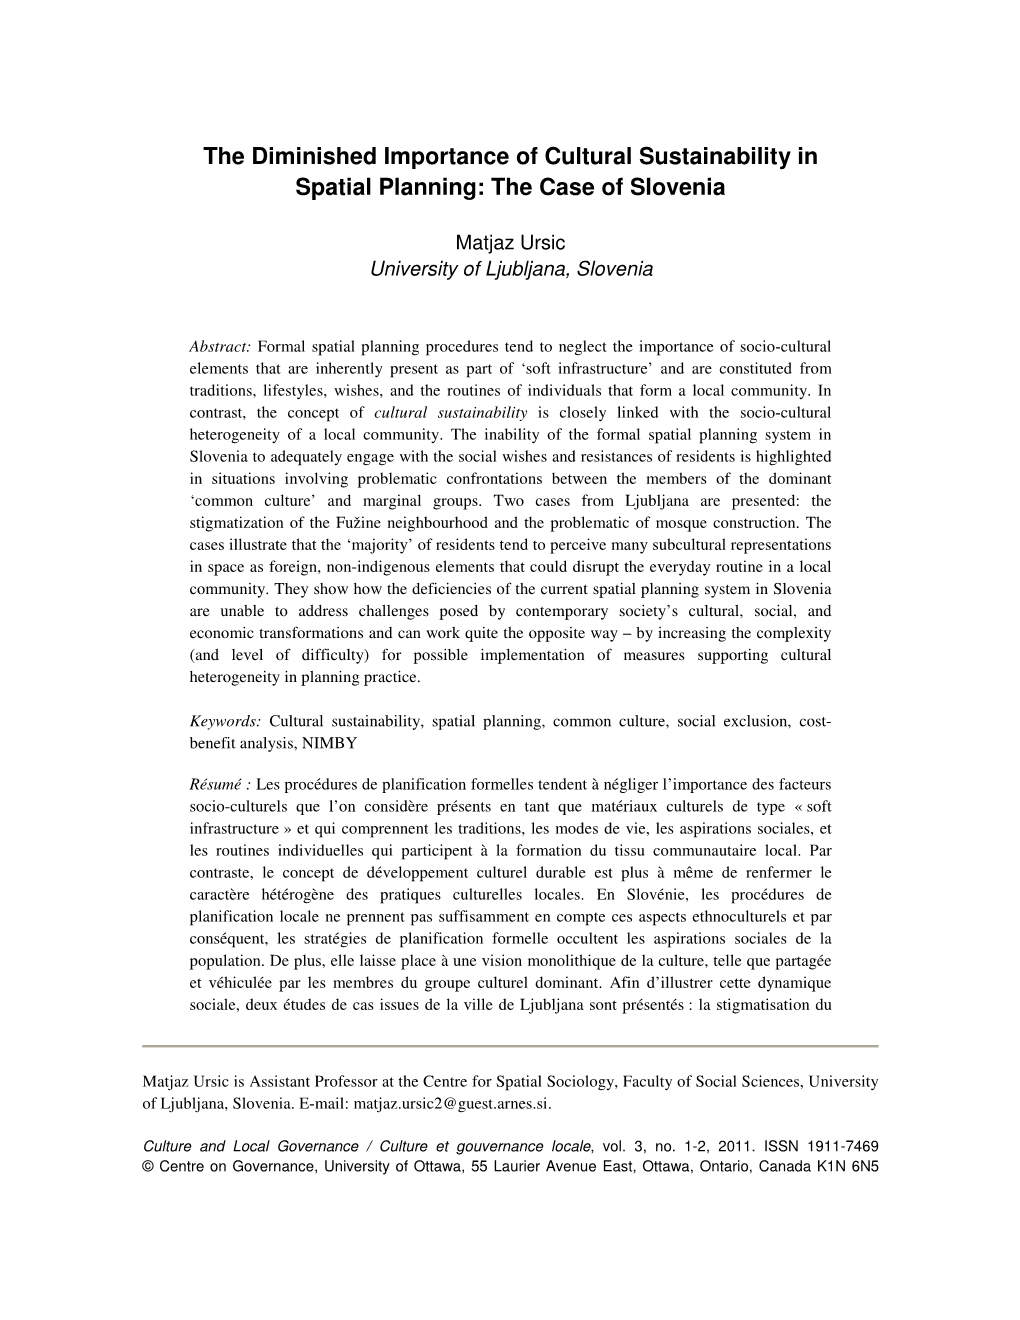 The Diminished Importance of Cultural Sustainability in Spatial Planning: the Case of Slovenia